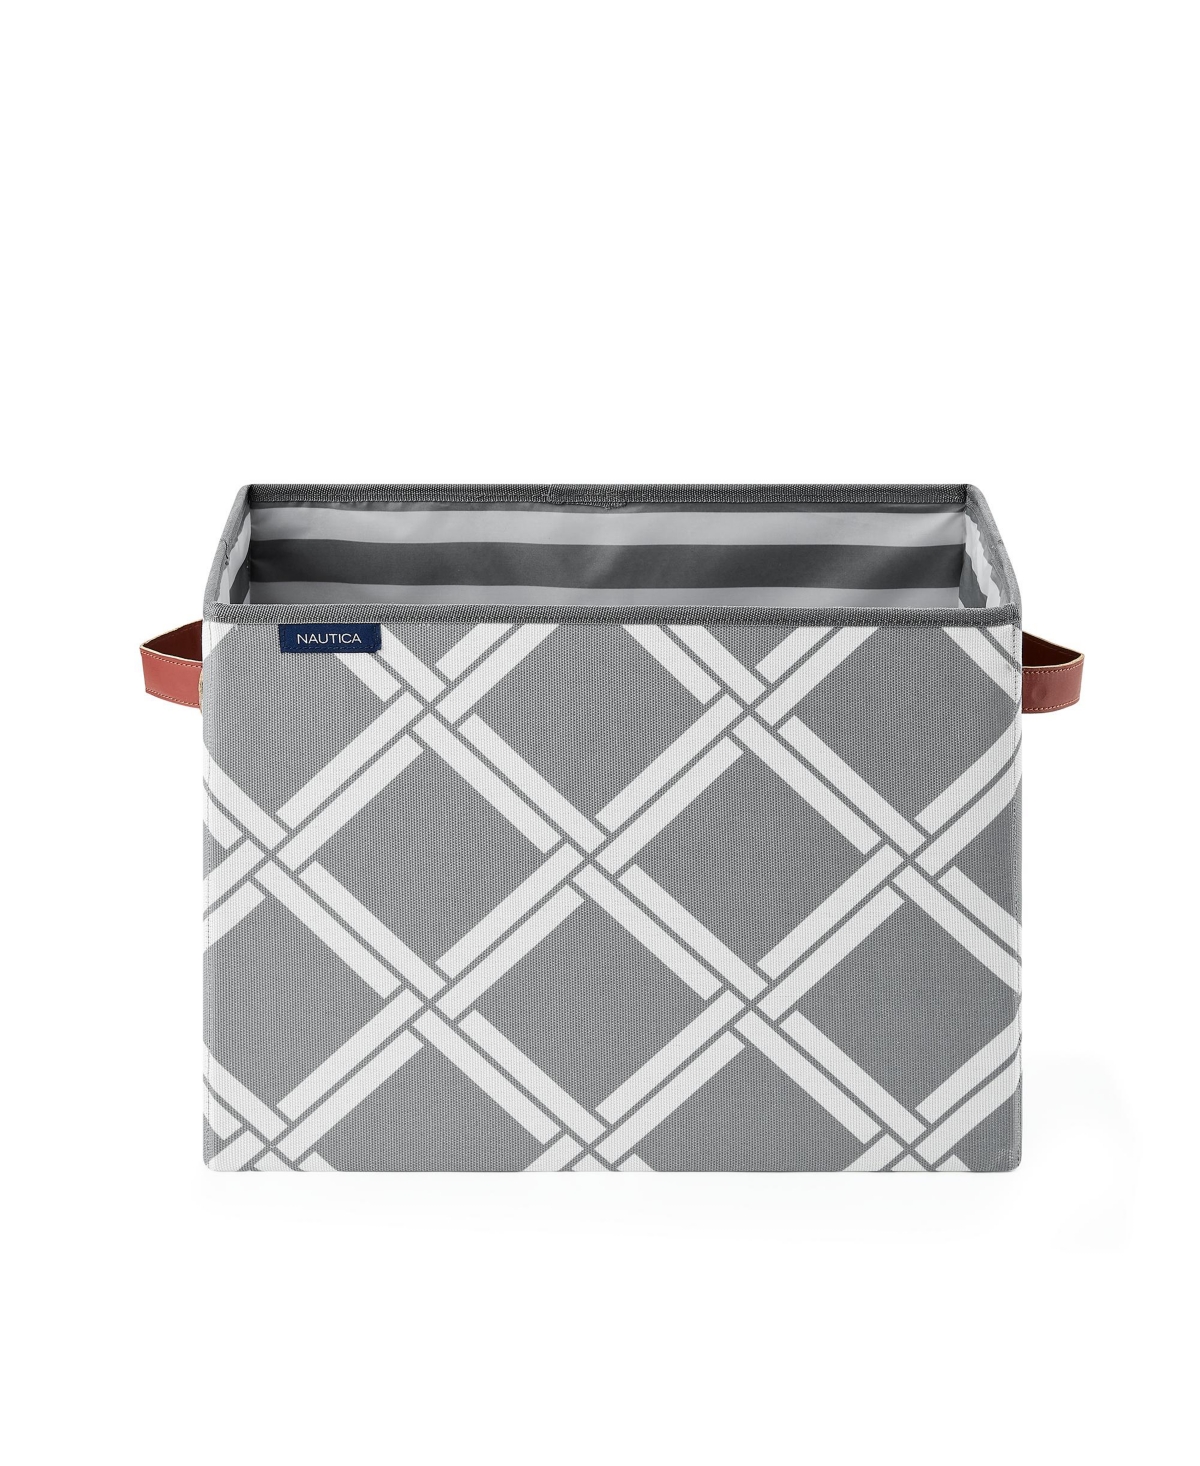 Nautica Folded Large Storage Trunk With Lid Stripe In Gray Box Weave